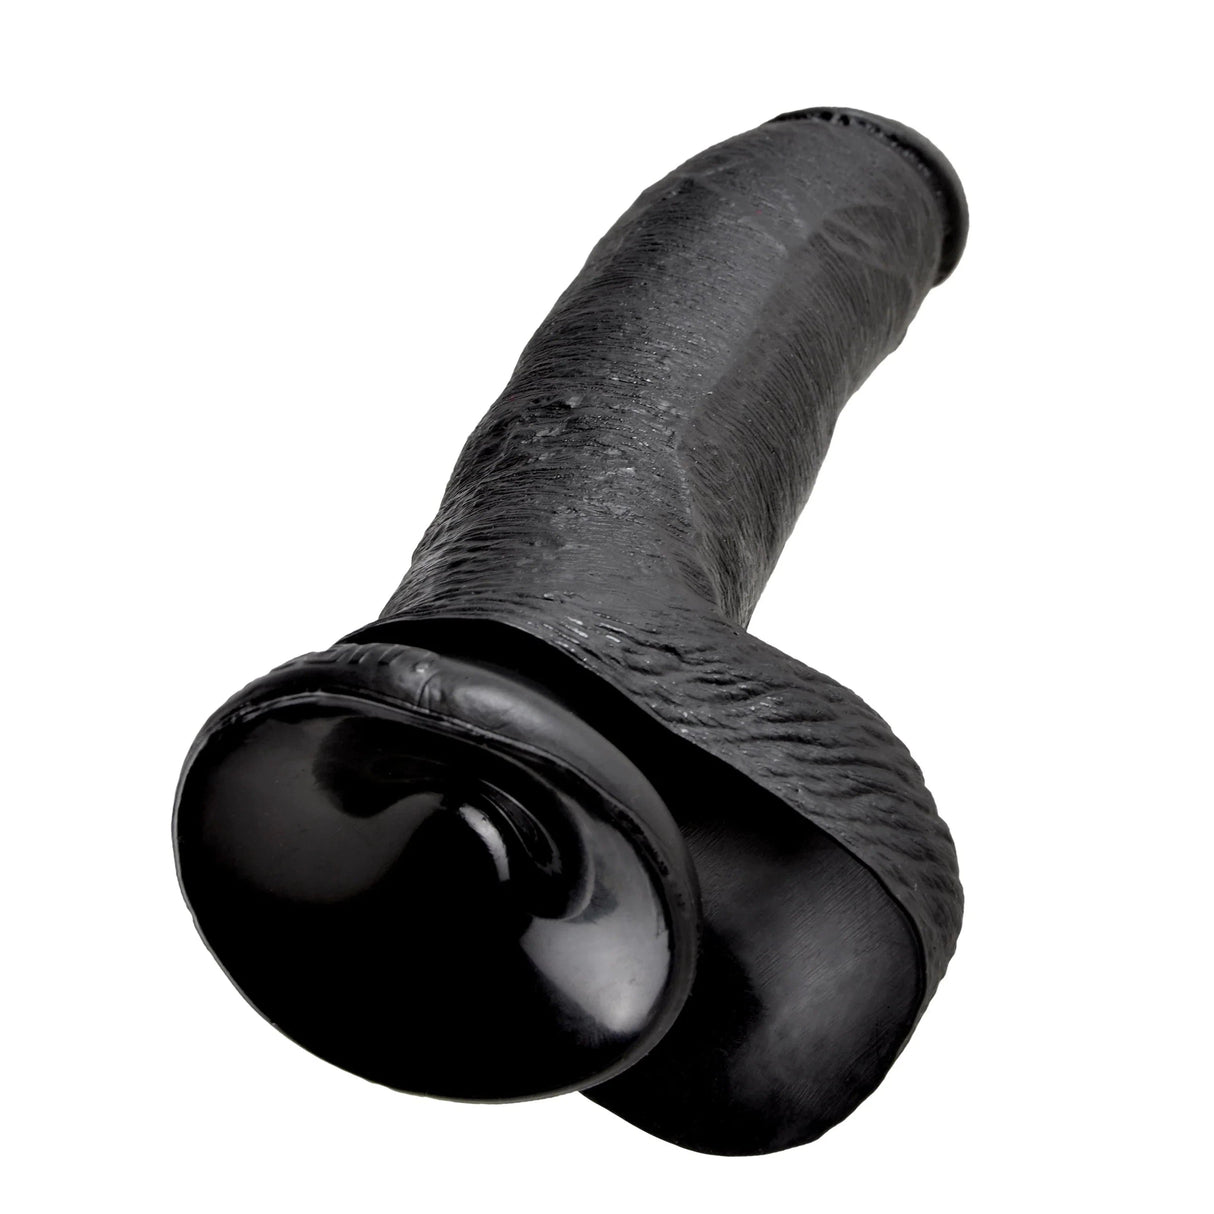 King Cock 9 Inch Dildo with Balls